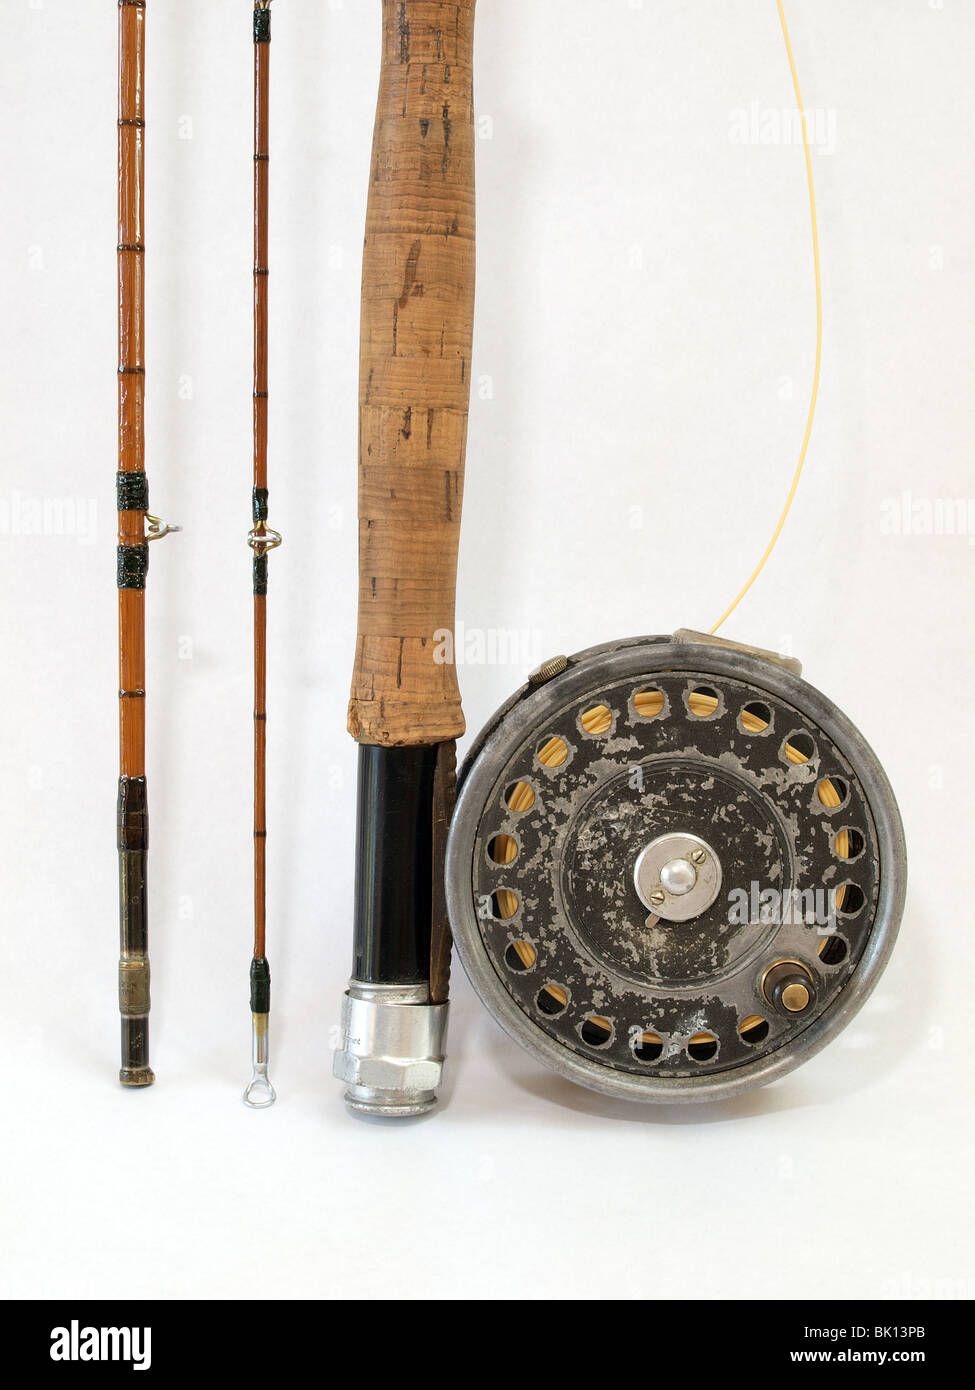 Trout rod and reel Stock Photo